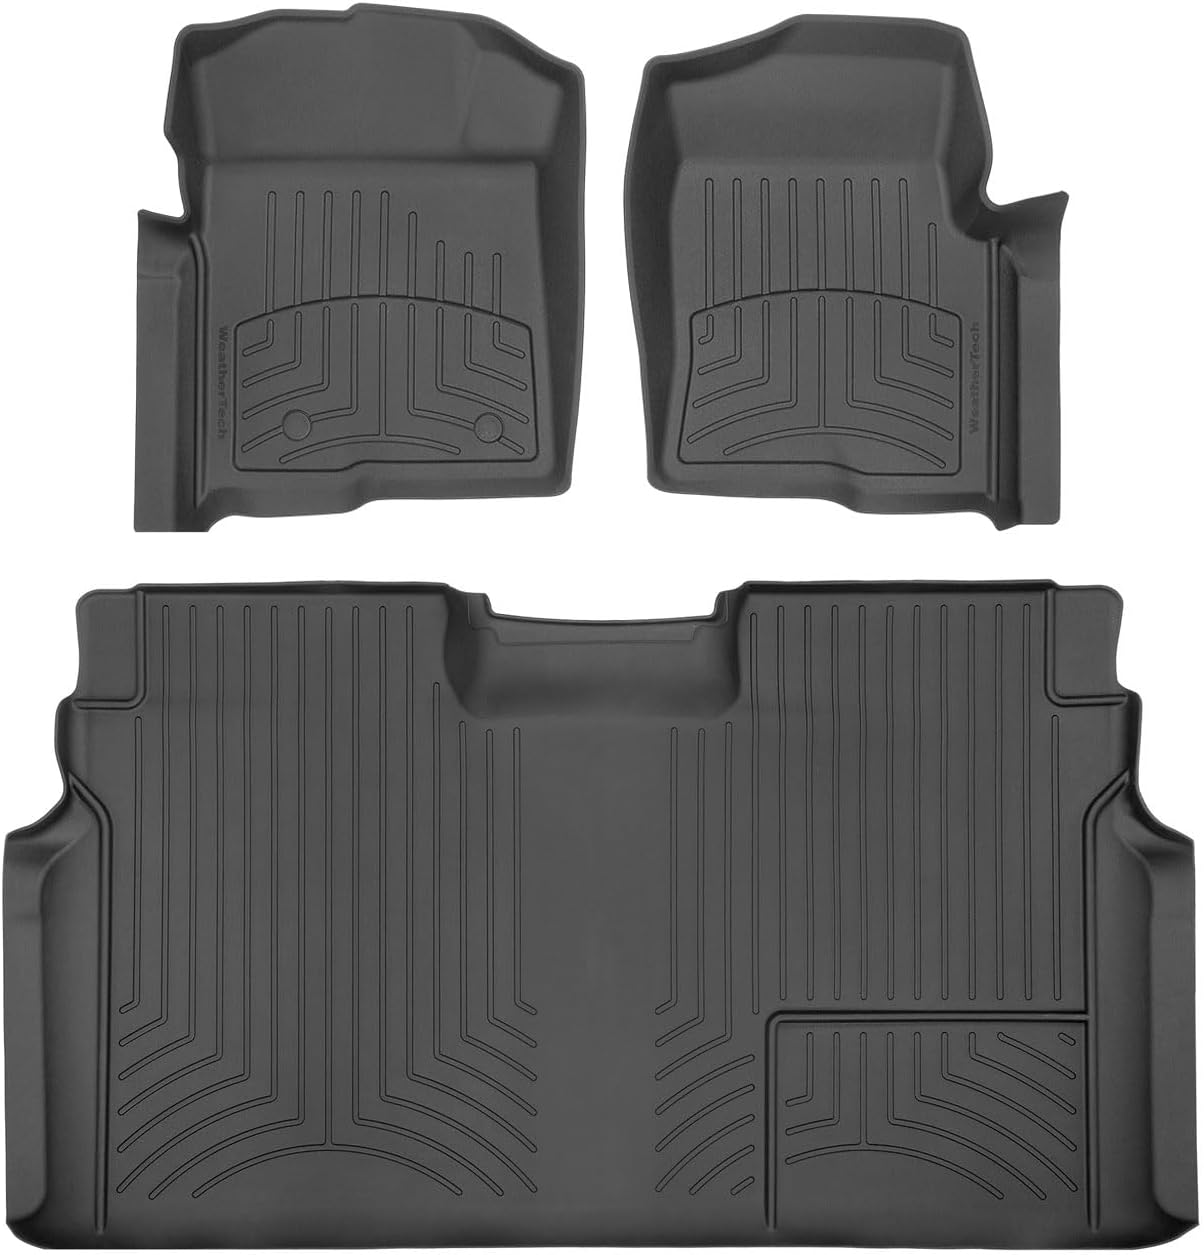 WeatherTech 2010 Ford F-150 Front and Rear FloorLiner HP - Black - 446111IM-441793